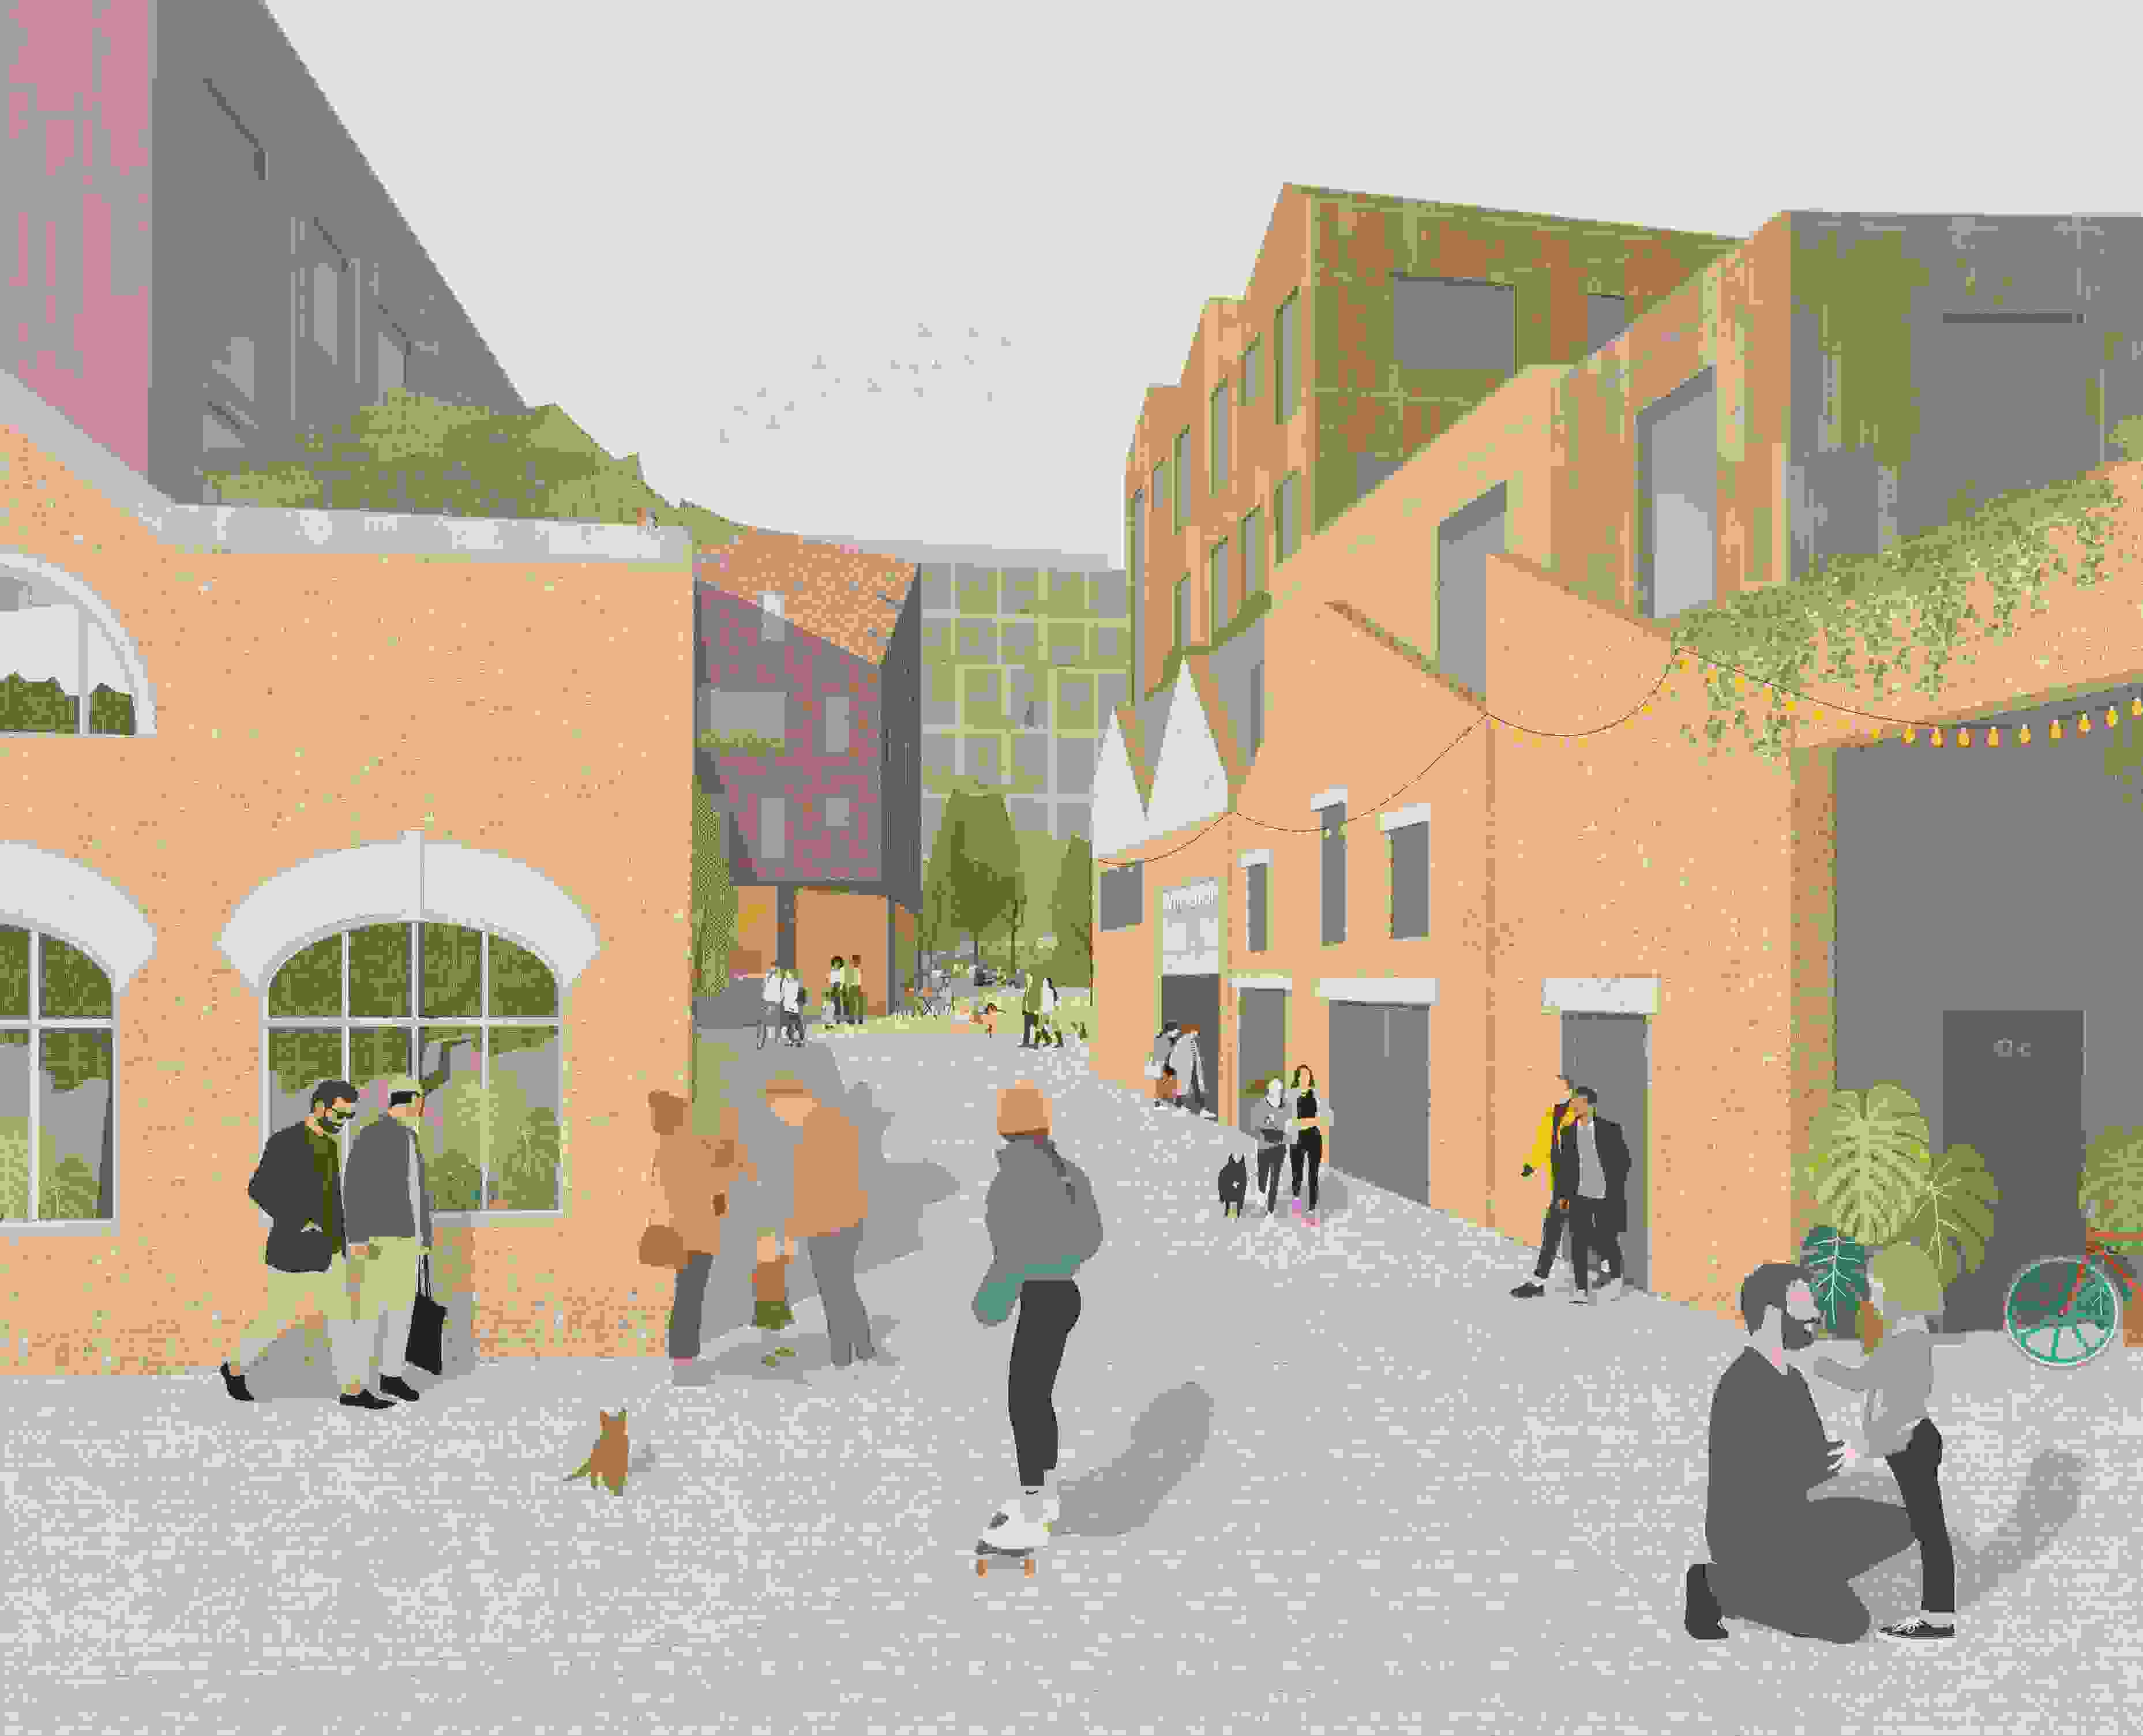 An artist impression of what the Neepsend development will look like after redevelopment.